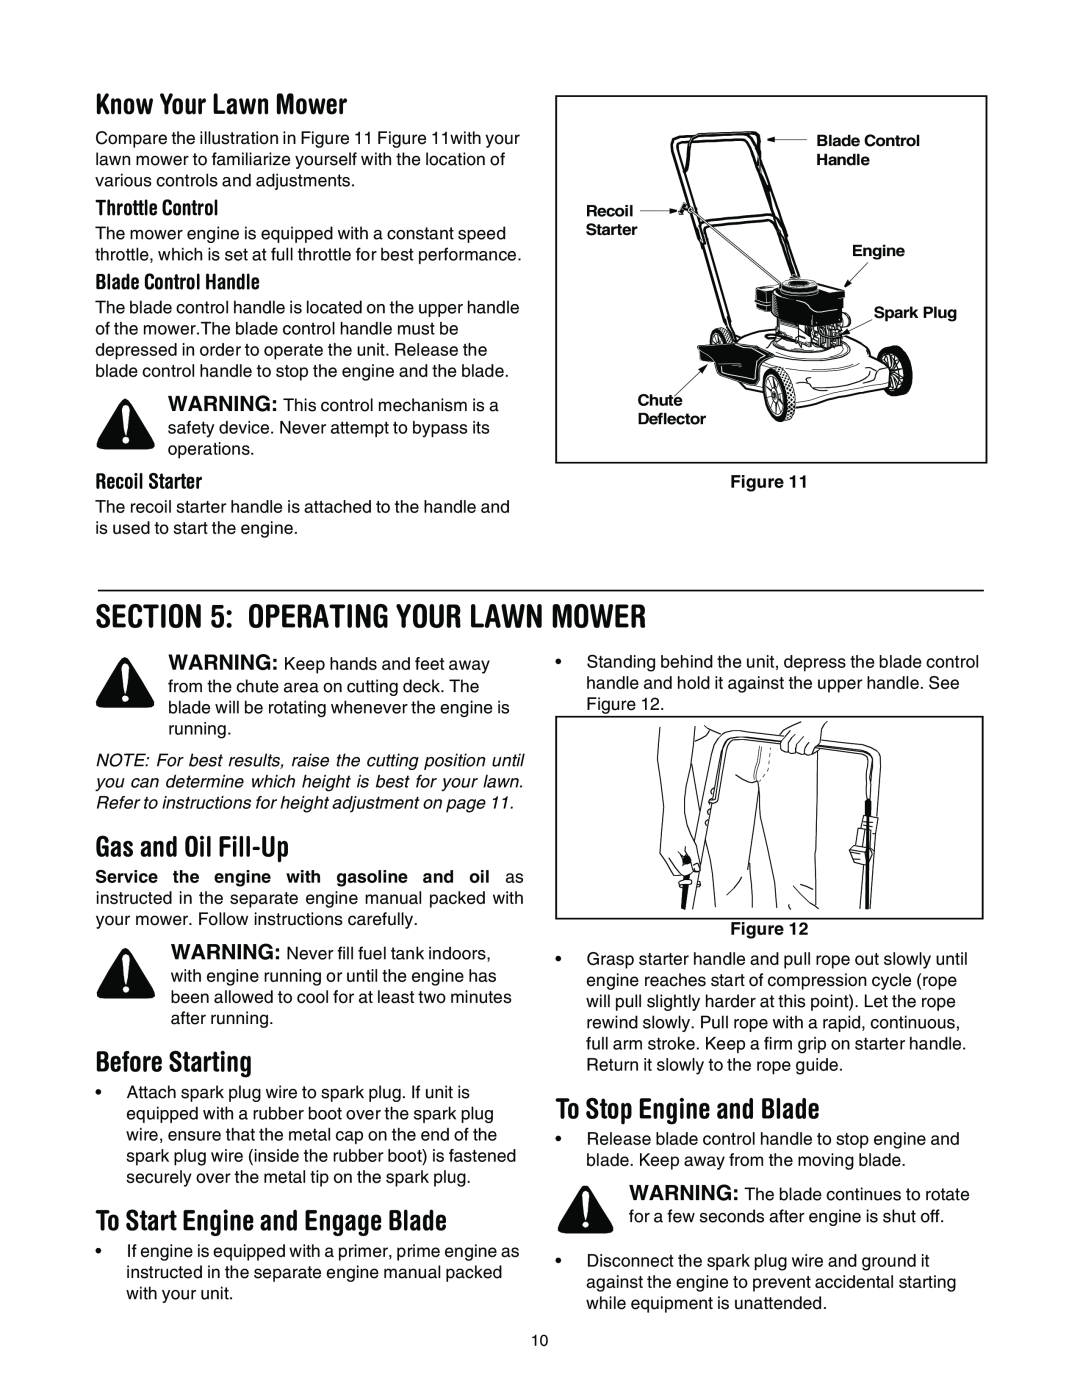 MTD 021 Operating Your Lawn Mower, Know Your Lawn Mower, Gas and Oil Fill-Up, Before Starting, To Stop Engine and Blade 